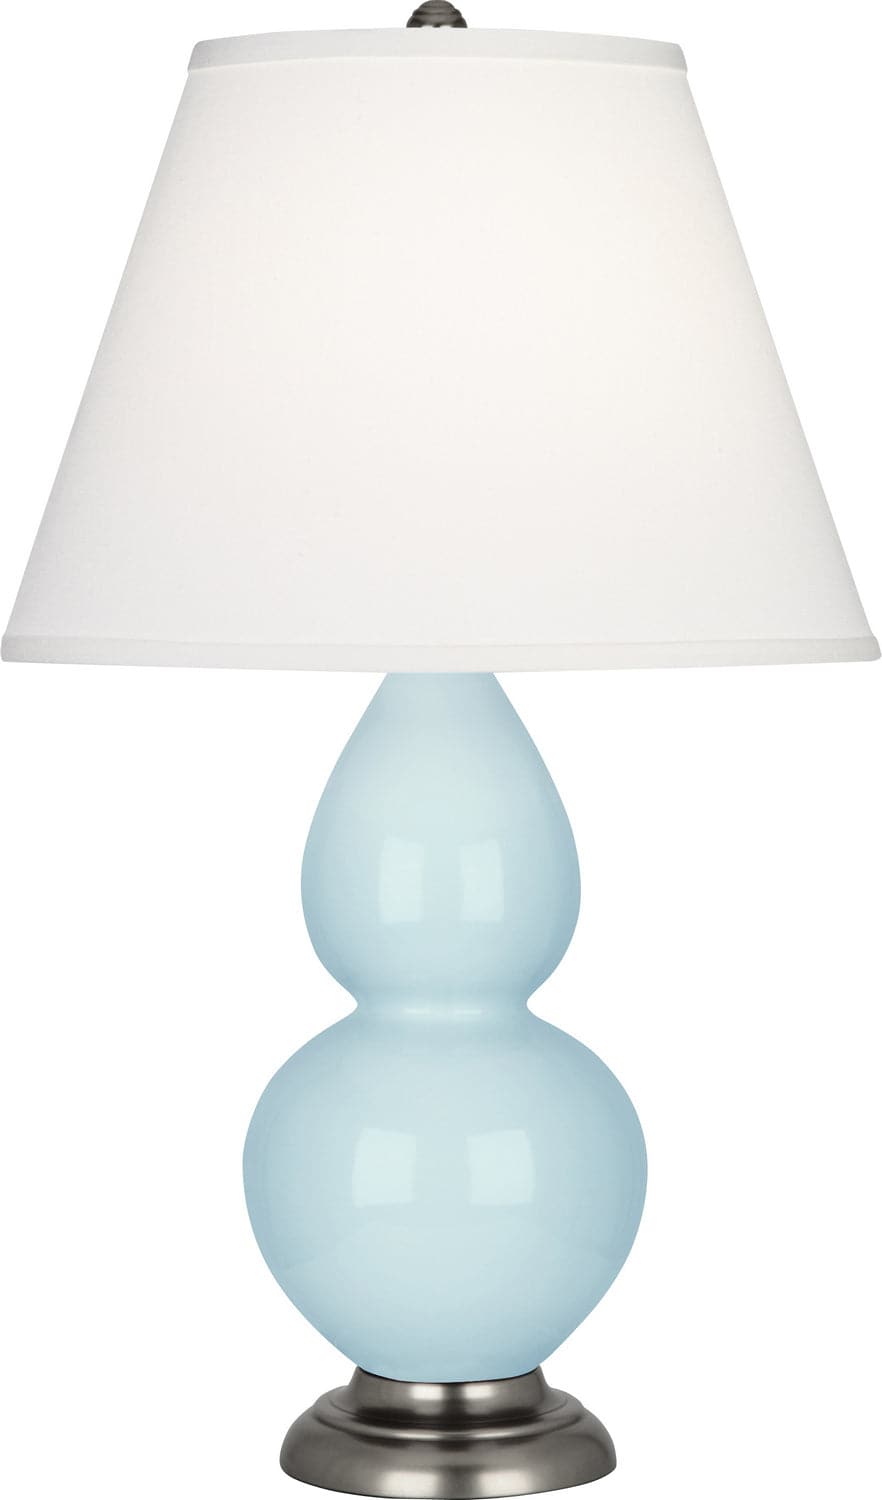 Robert Abbey - 1696X - One Light Accent Lamp - Small Double Gourd - Baby Blue Glazed w/Antique Silver